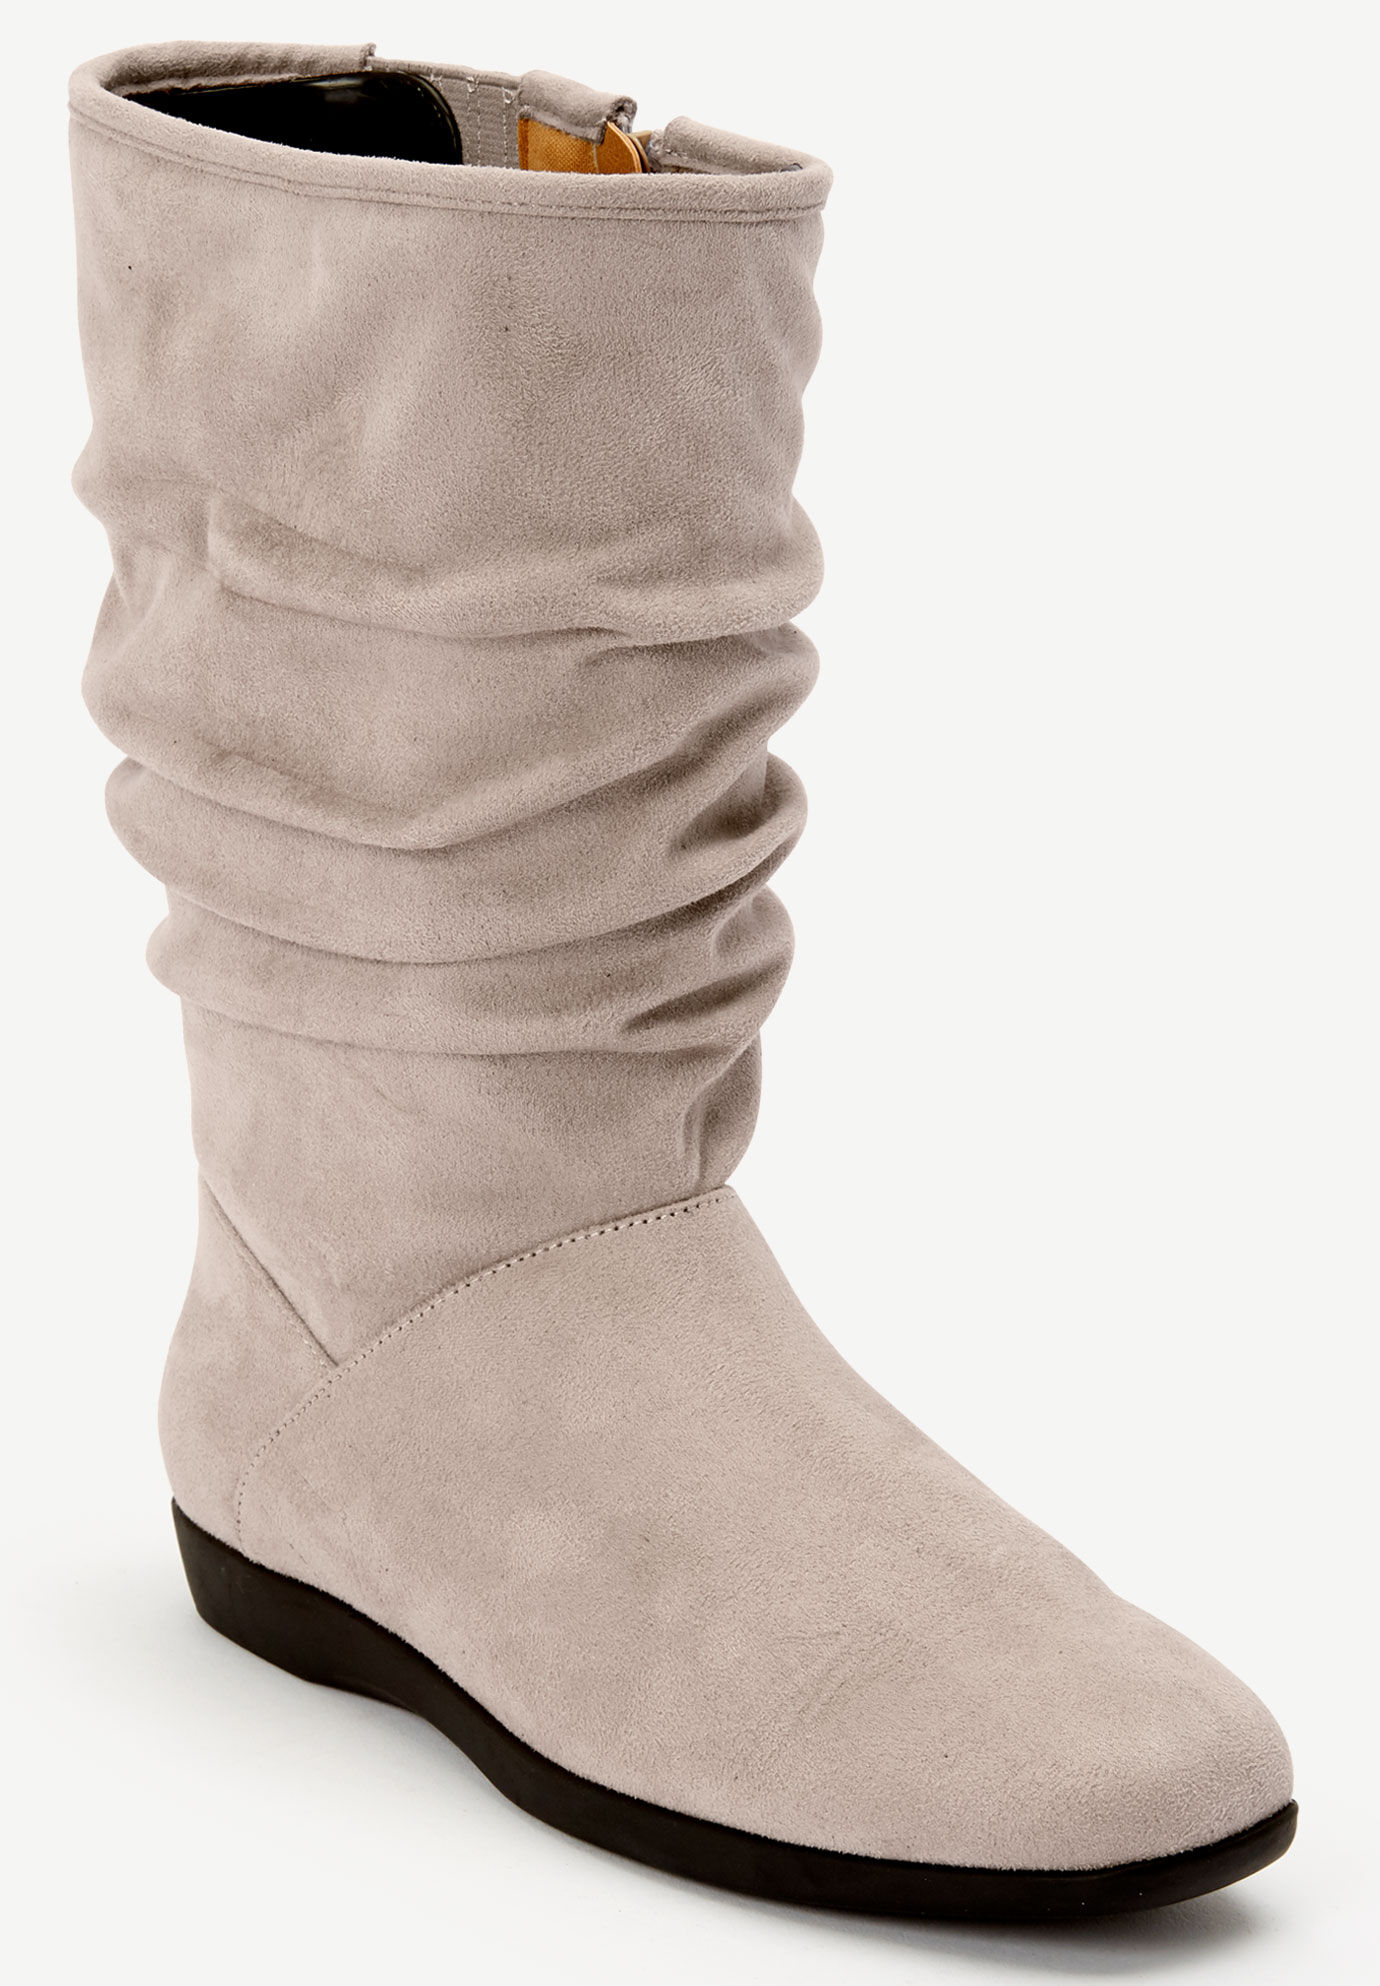 wide mid calf boot